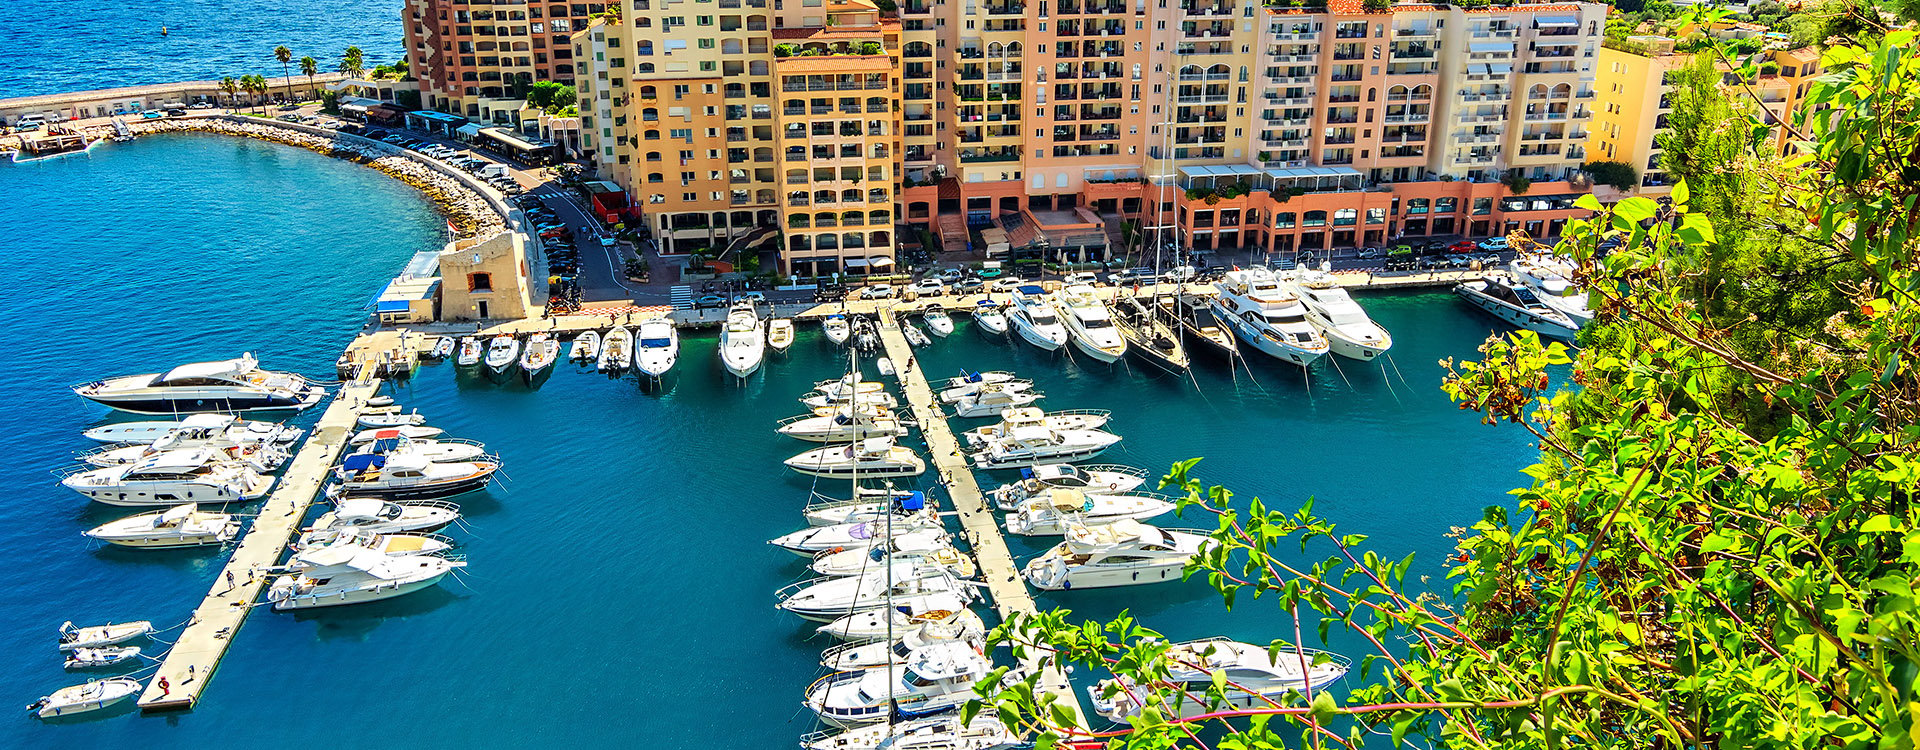 Apartments,harbor,and luxury yachts in the bay,Monte Carlo,Monaco,Europe